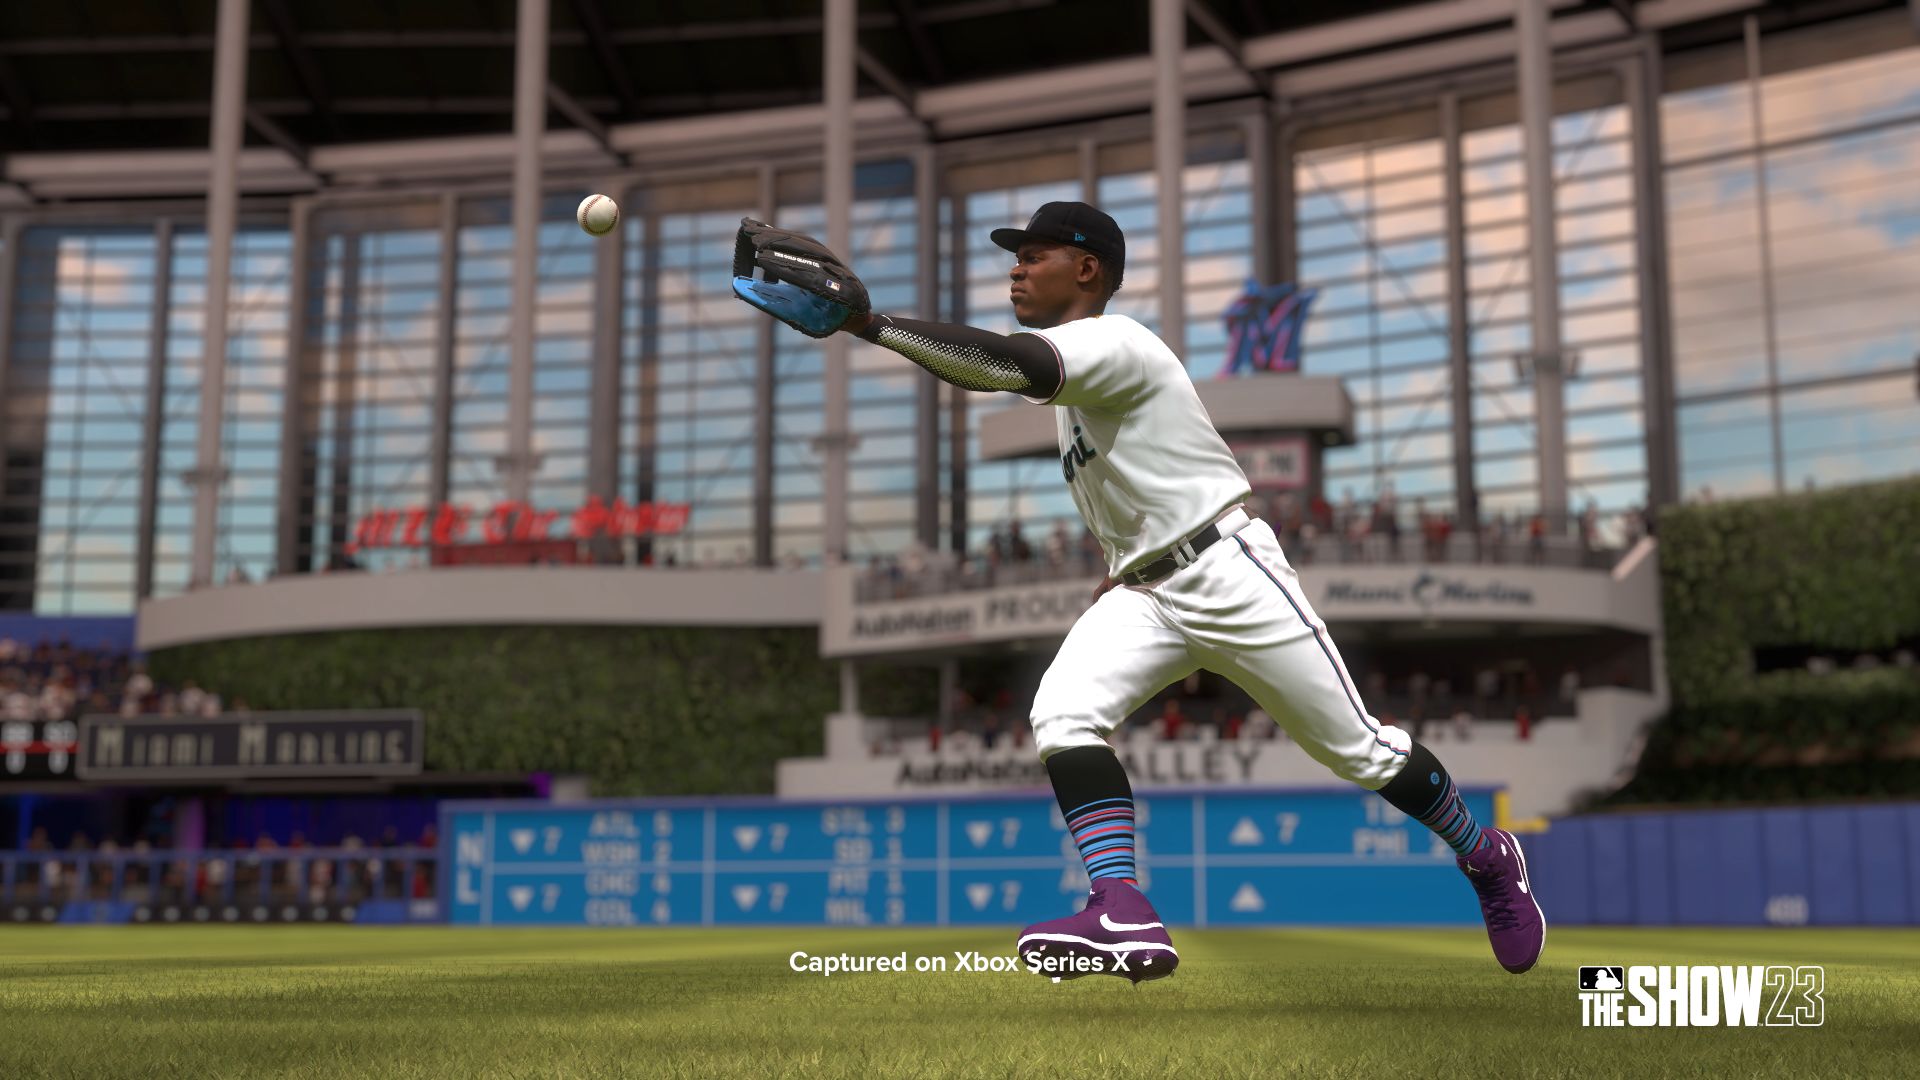 MLB The Show 23 players cannot equip custom jerseys in Diamond Dynasty mode